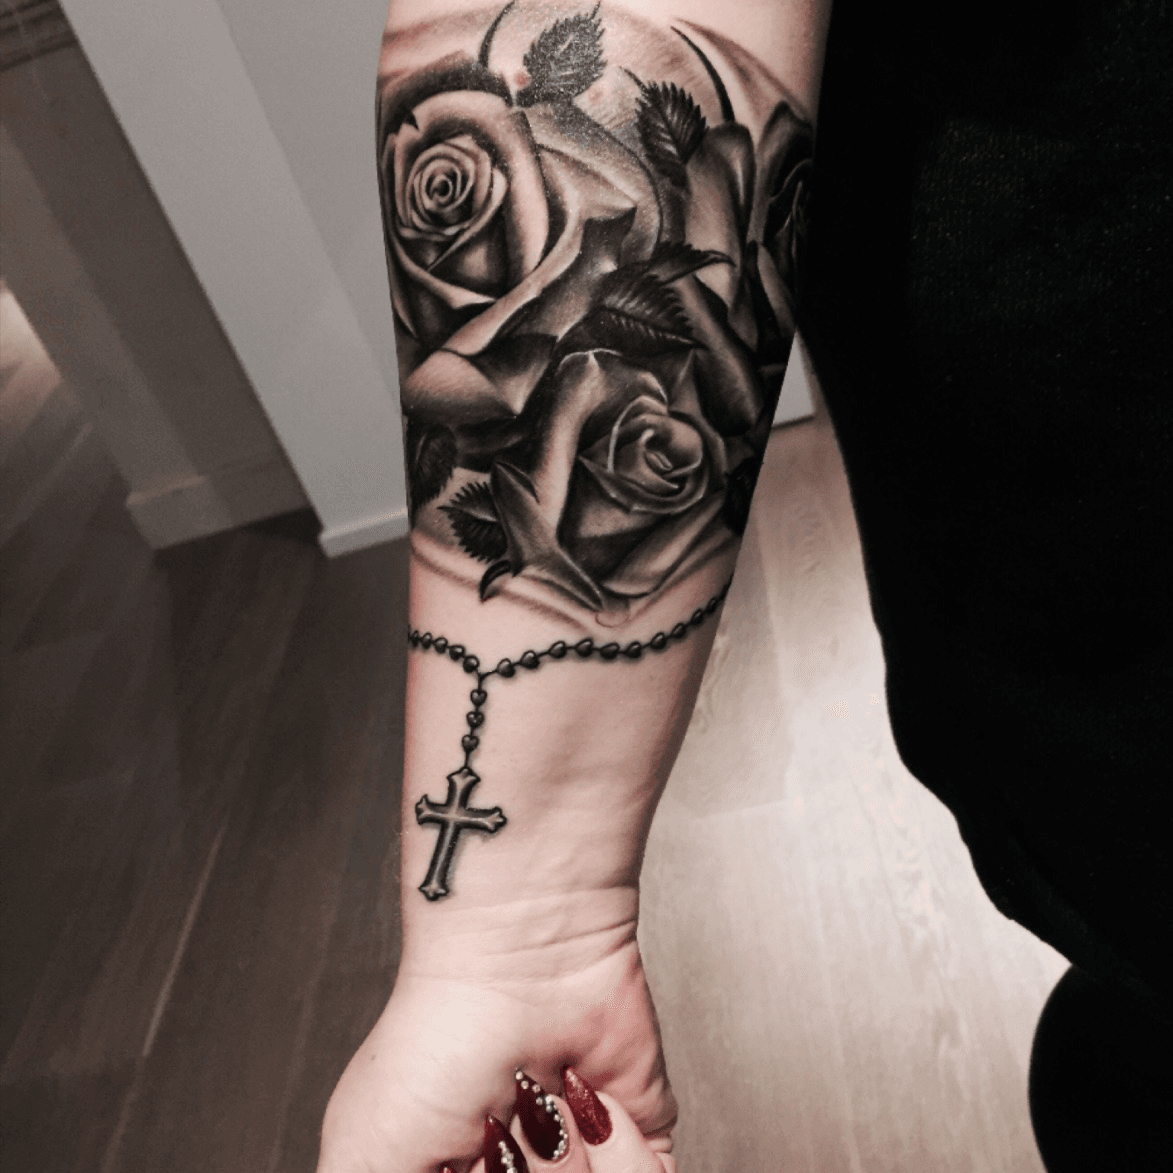 Tattoos of roses with rosaries  Tattooing